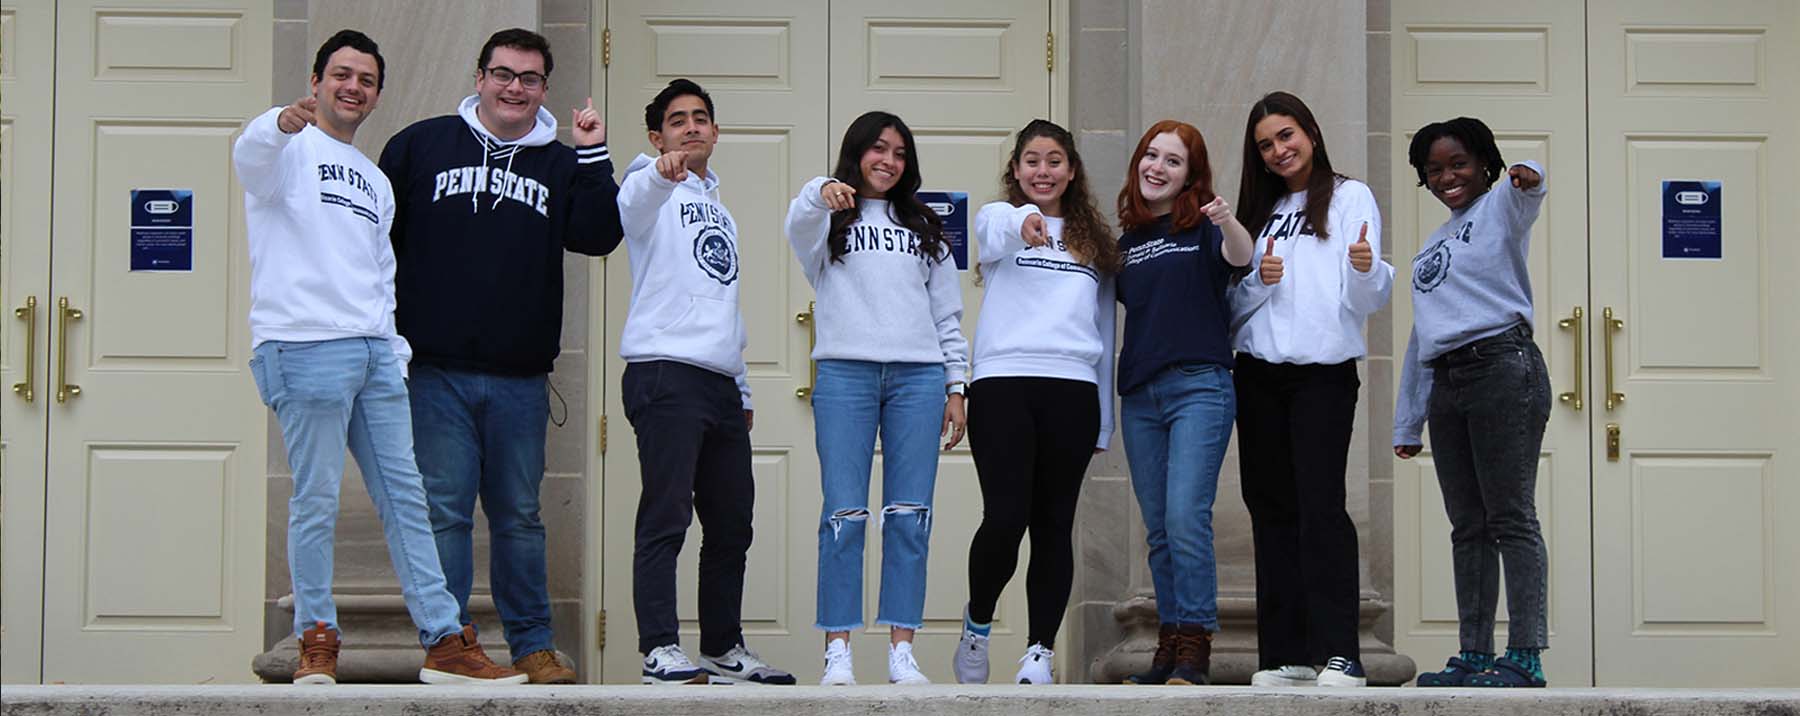 A student with a camera, shoulder-length curly brown hair, glasses and a Penn State sweatshirt, poses with her arms
outstretched to mimic the sculpture of five children playing on the lawn of the old president's house that is now part of the Hintz Family Alumni Center.